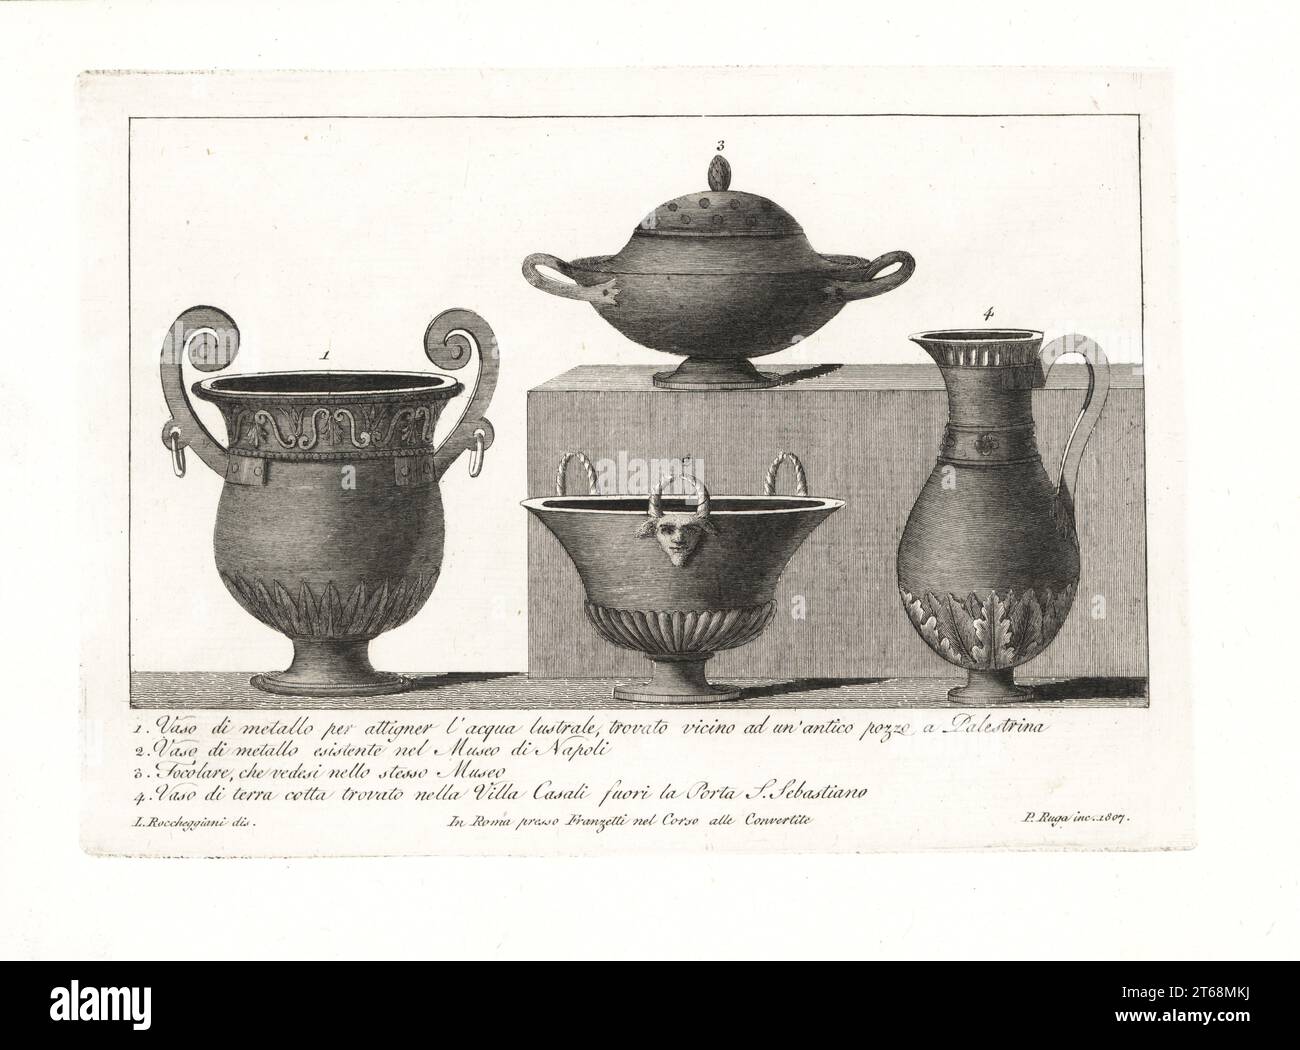 Metal vase used to draw holy water, found near an ancient well in Palestrina 1, vase 2 and hearth or focolare 3 from the Museo Napoli, and terracotta vase from the Villa Casali near the Porta San Sebastiano 4. Copperplate engraving by Pietro Ruga after an illustration by Lorenzo Rocceggiani from his own 100 Plates of Costumes Religious, Civil and Military of the Ancient Egyptians, Etruscans, Greeks and Romans, Franzetti, Rome, 1802. Stock Photo